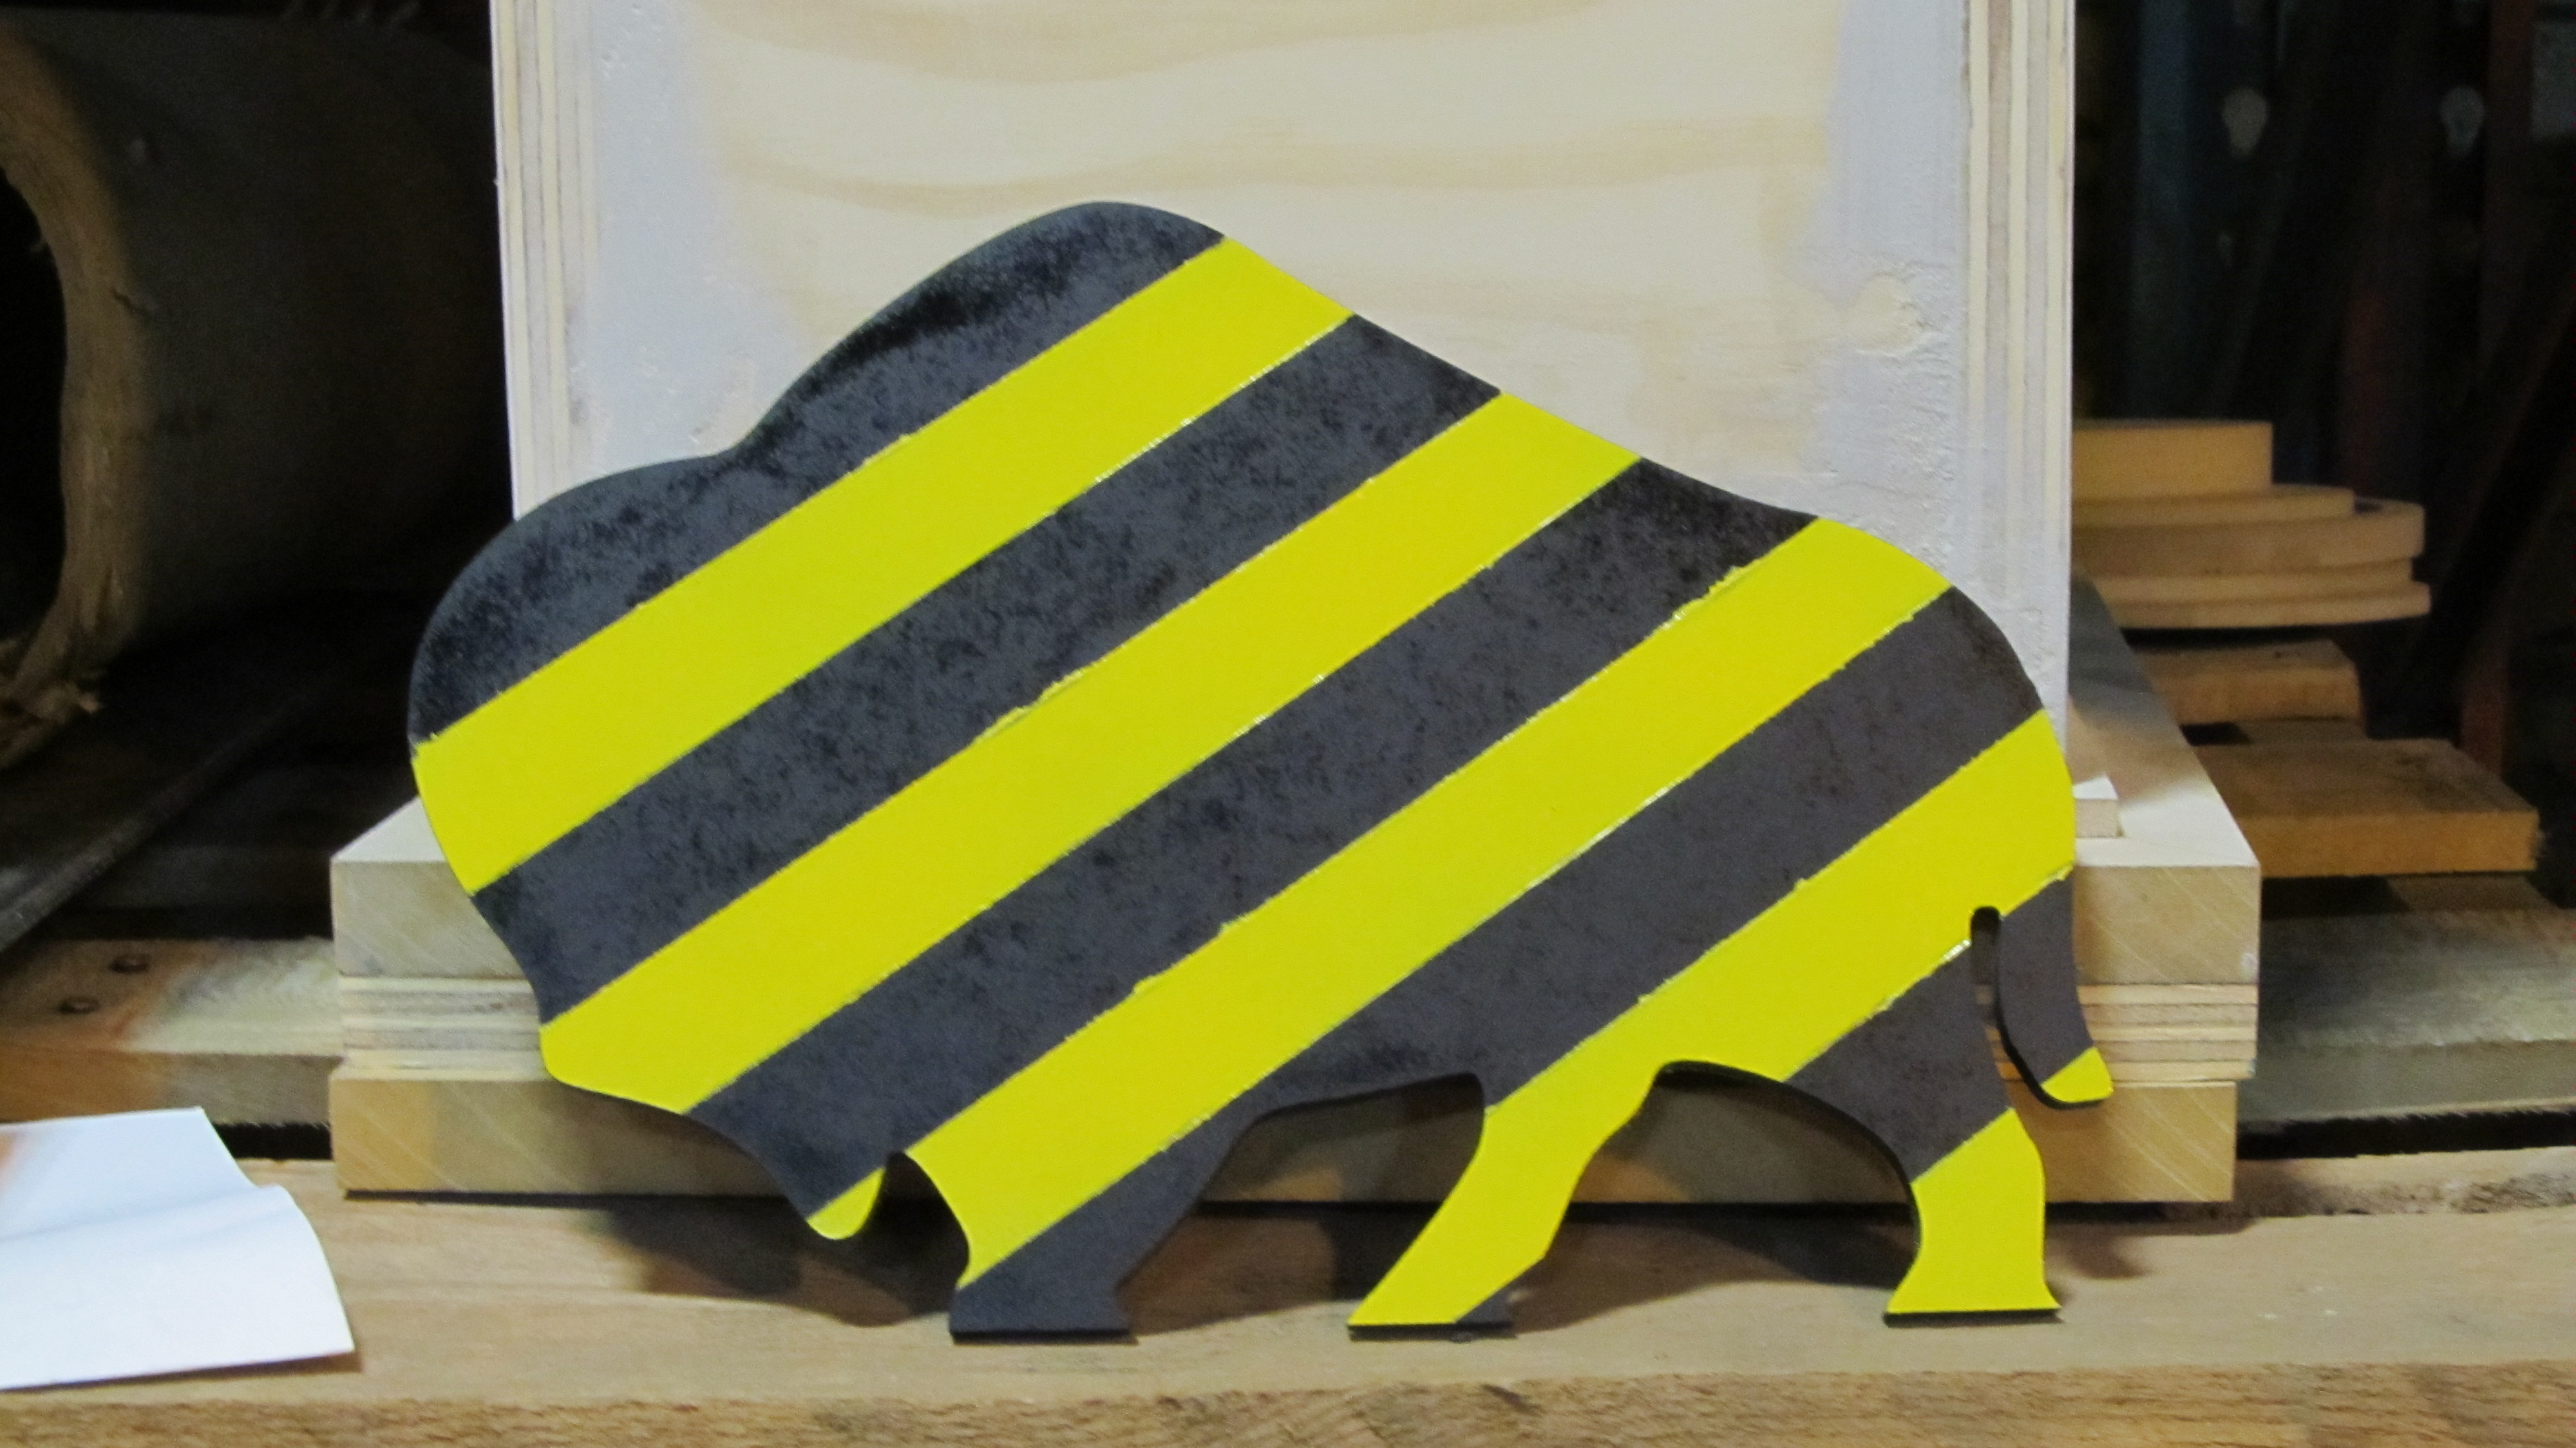 A silhouette of a buffalo, cut out of quarter-inch MDF, then painted with black and yellow caution stripes.